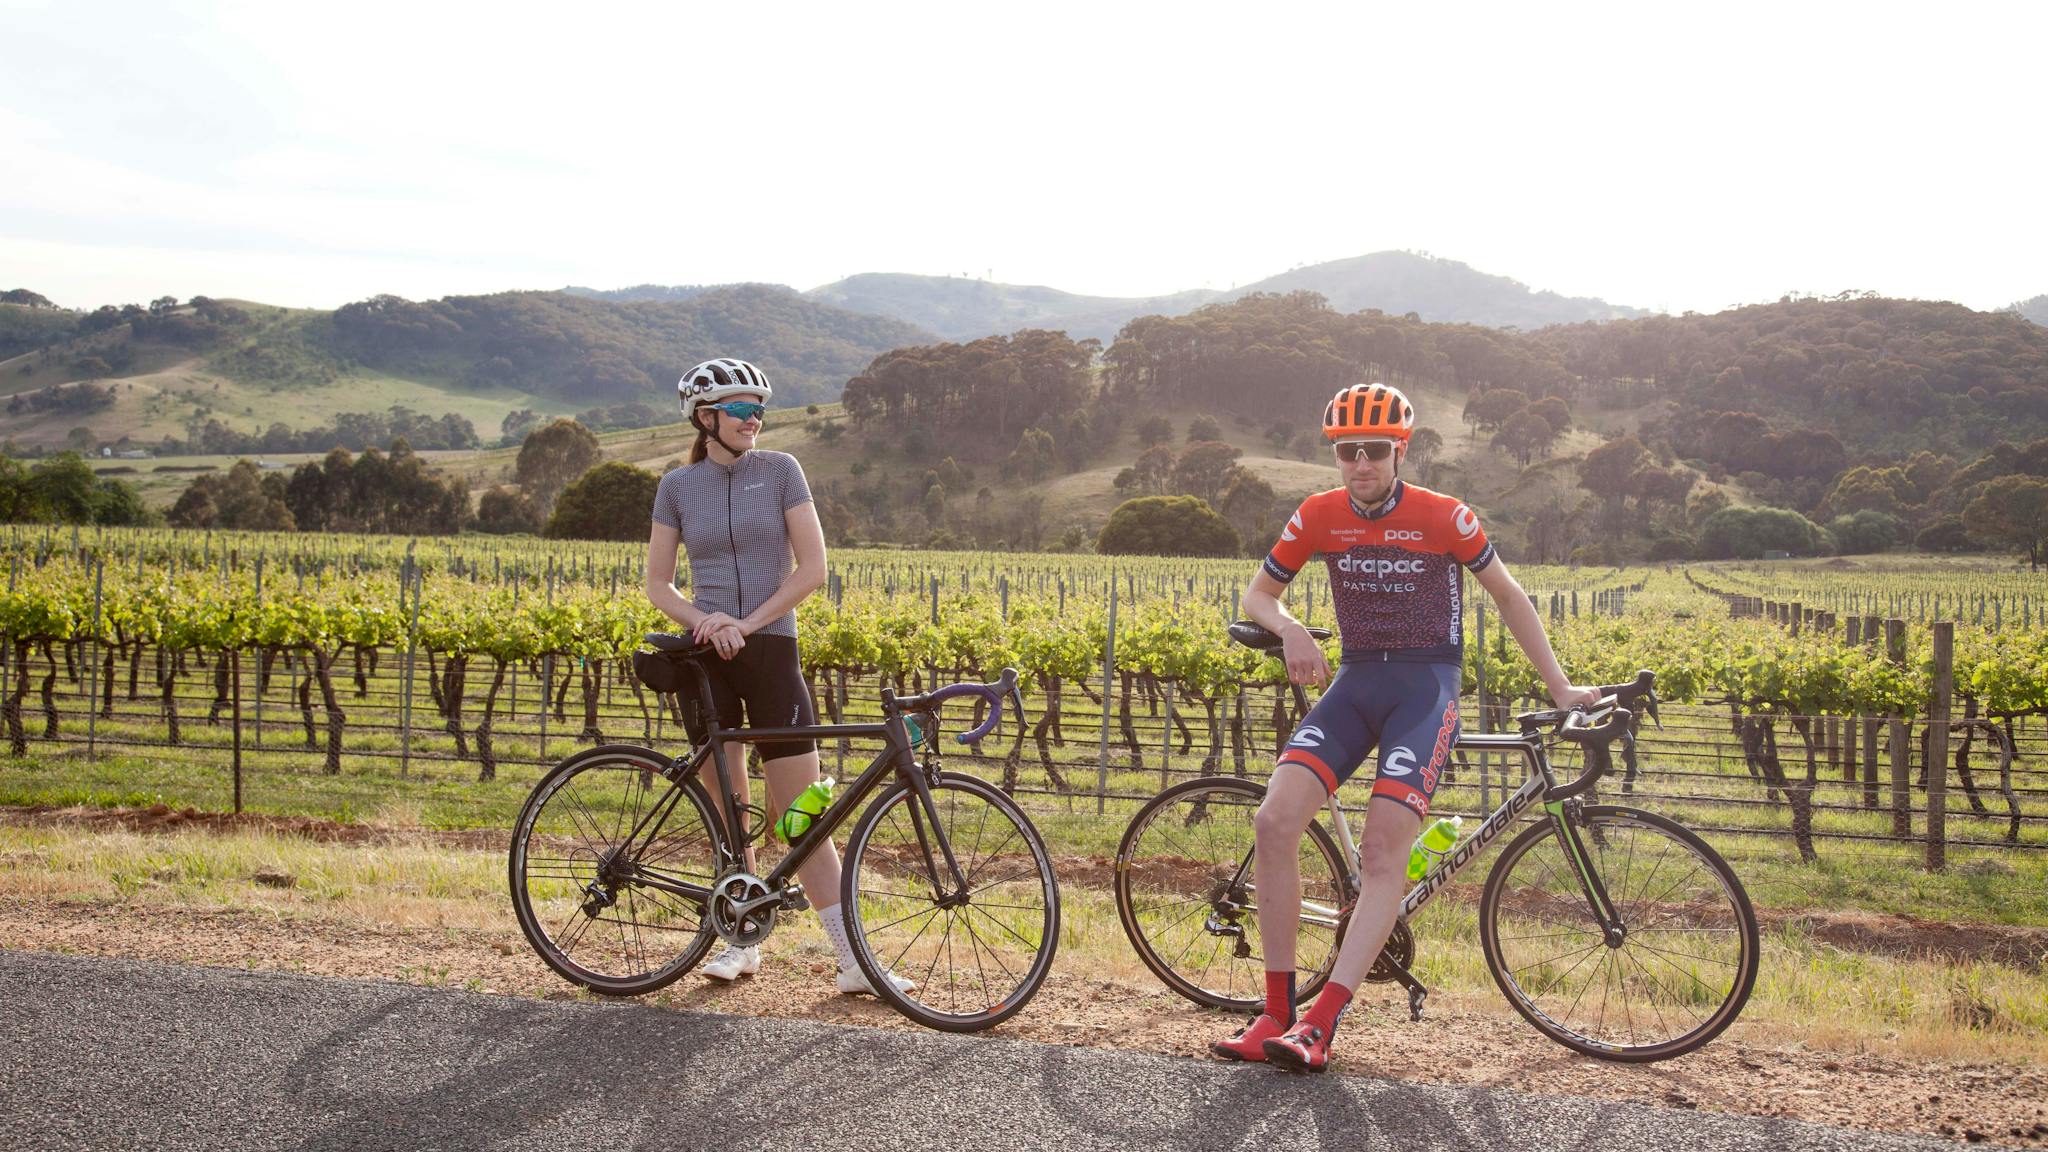 Road cyclists posing in front of grapevines, hills in the background, sunny day